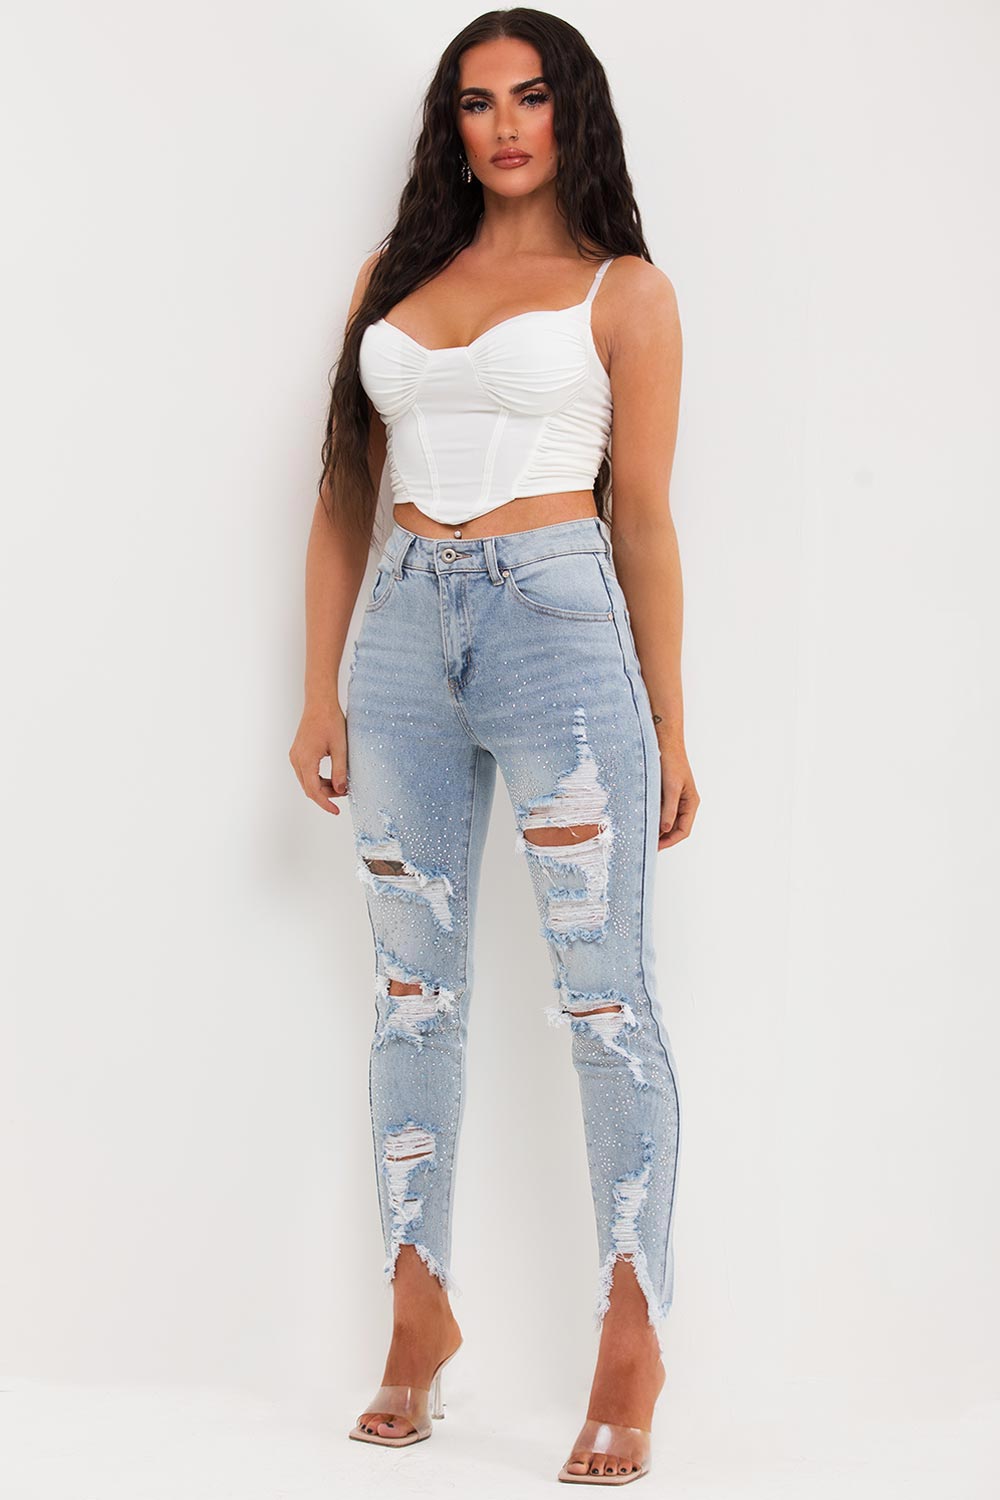 Womens Light Wash Ripped Jeans With Diamante Detail Uk